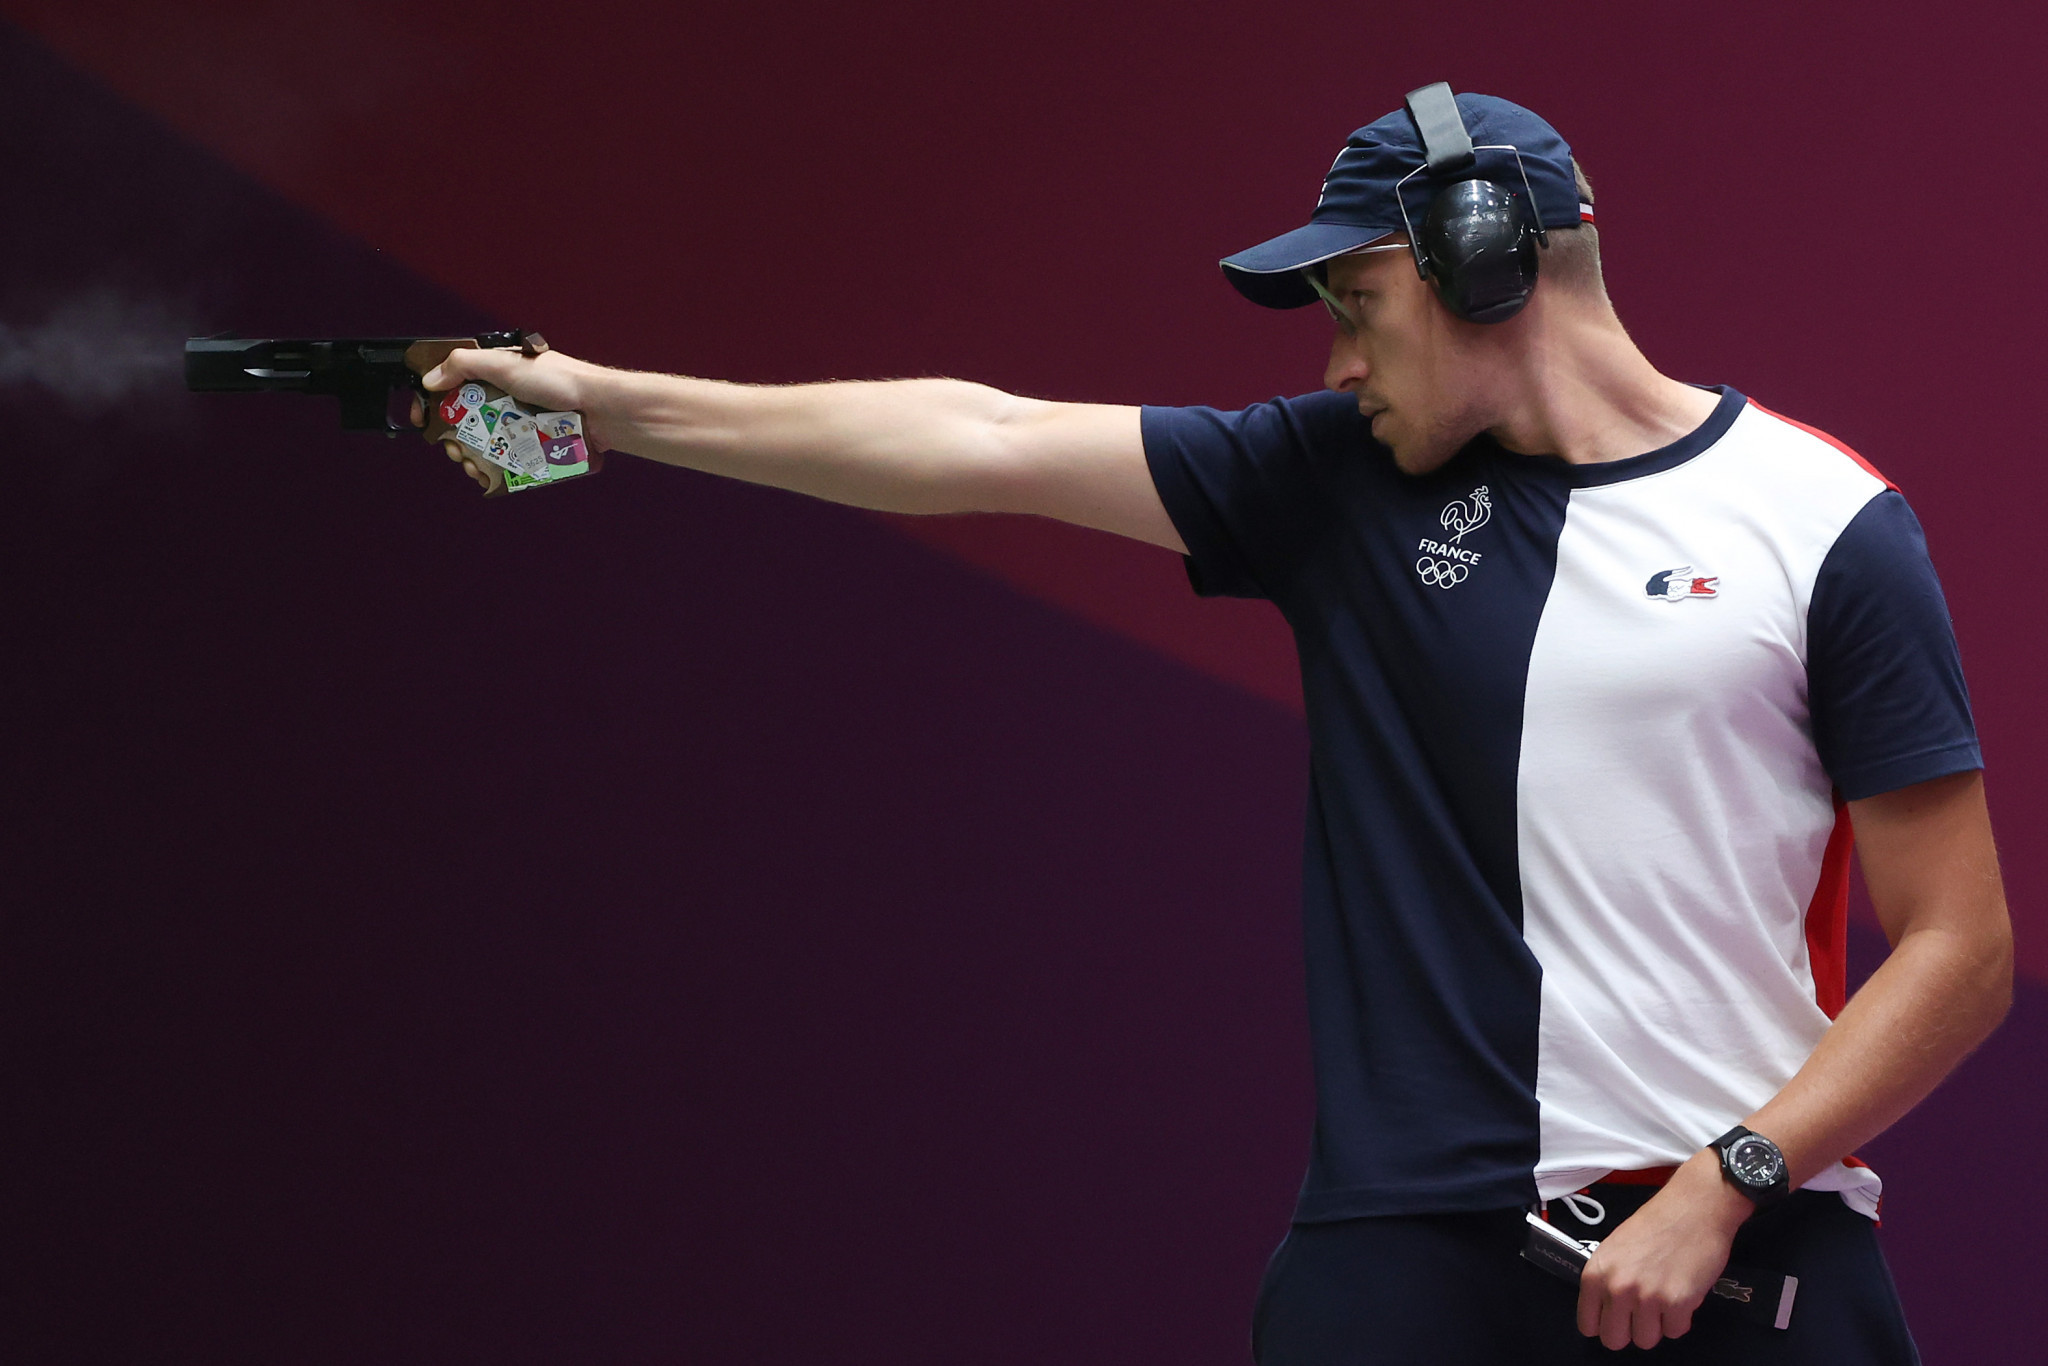 Olympic champion Quiquampoix claims men’s 25m rapid fire pistol title on penultimate day of ISSF World Cup